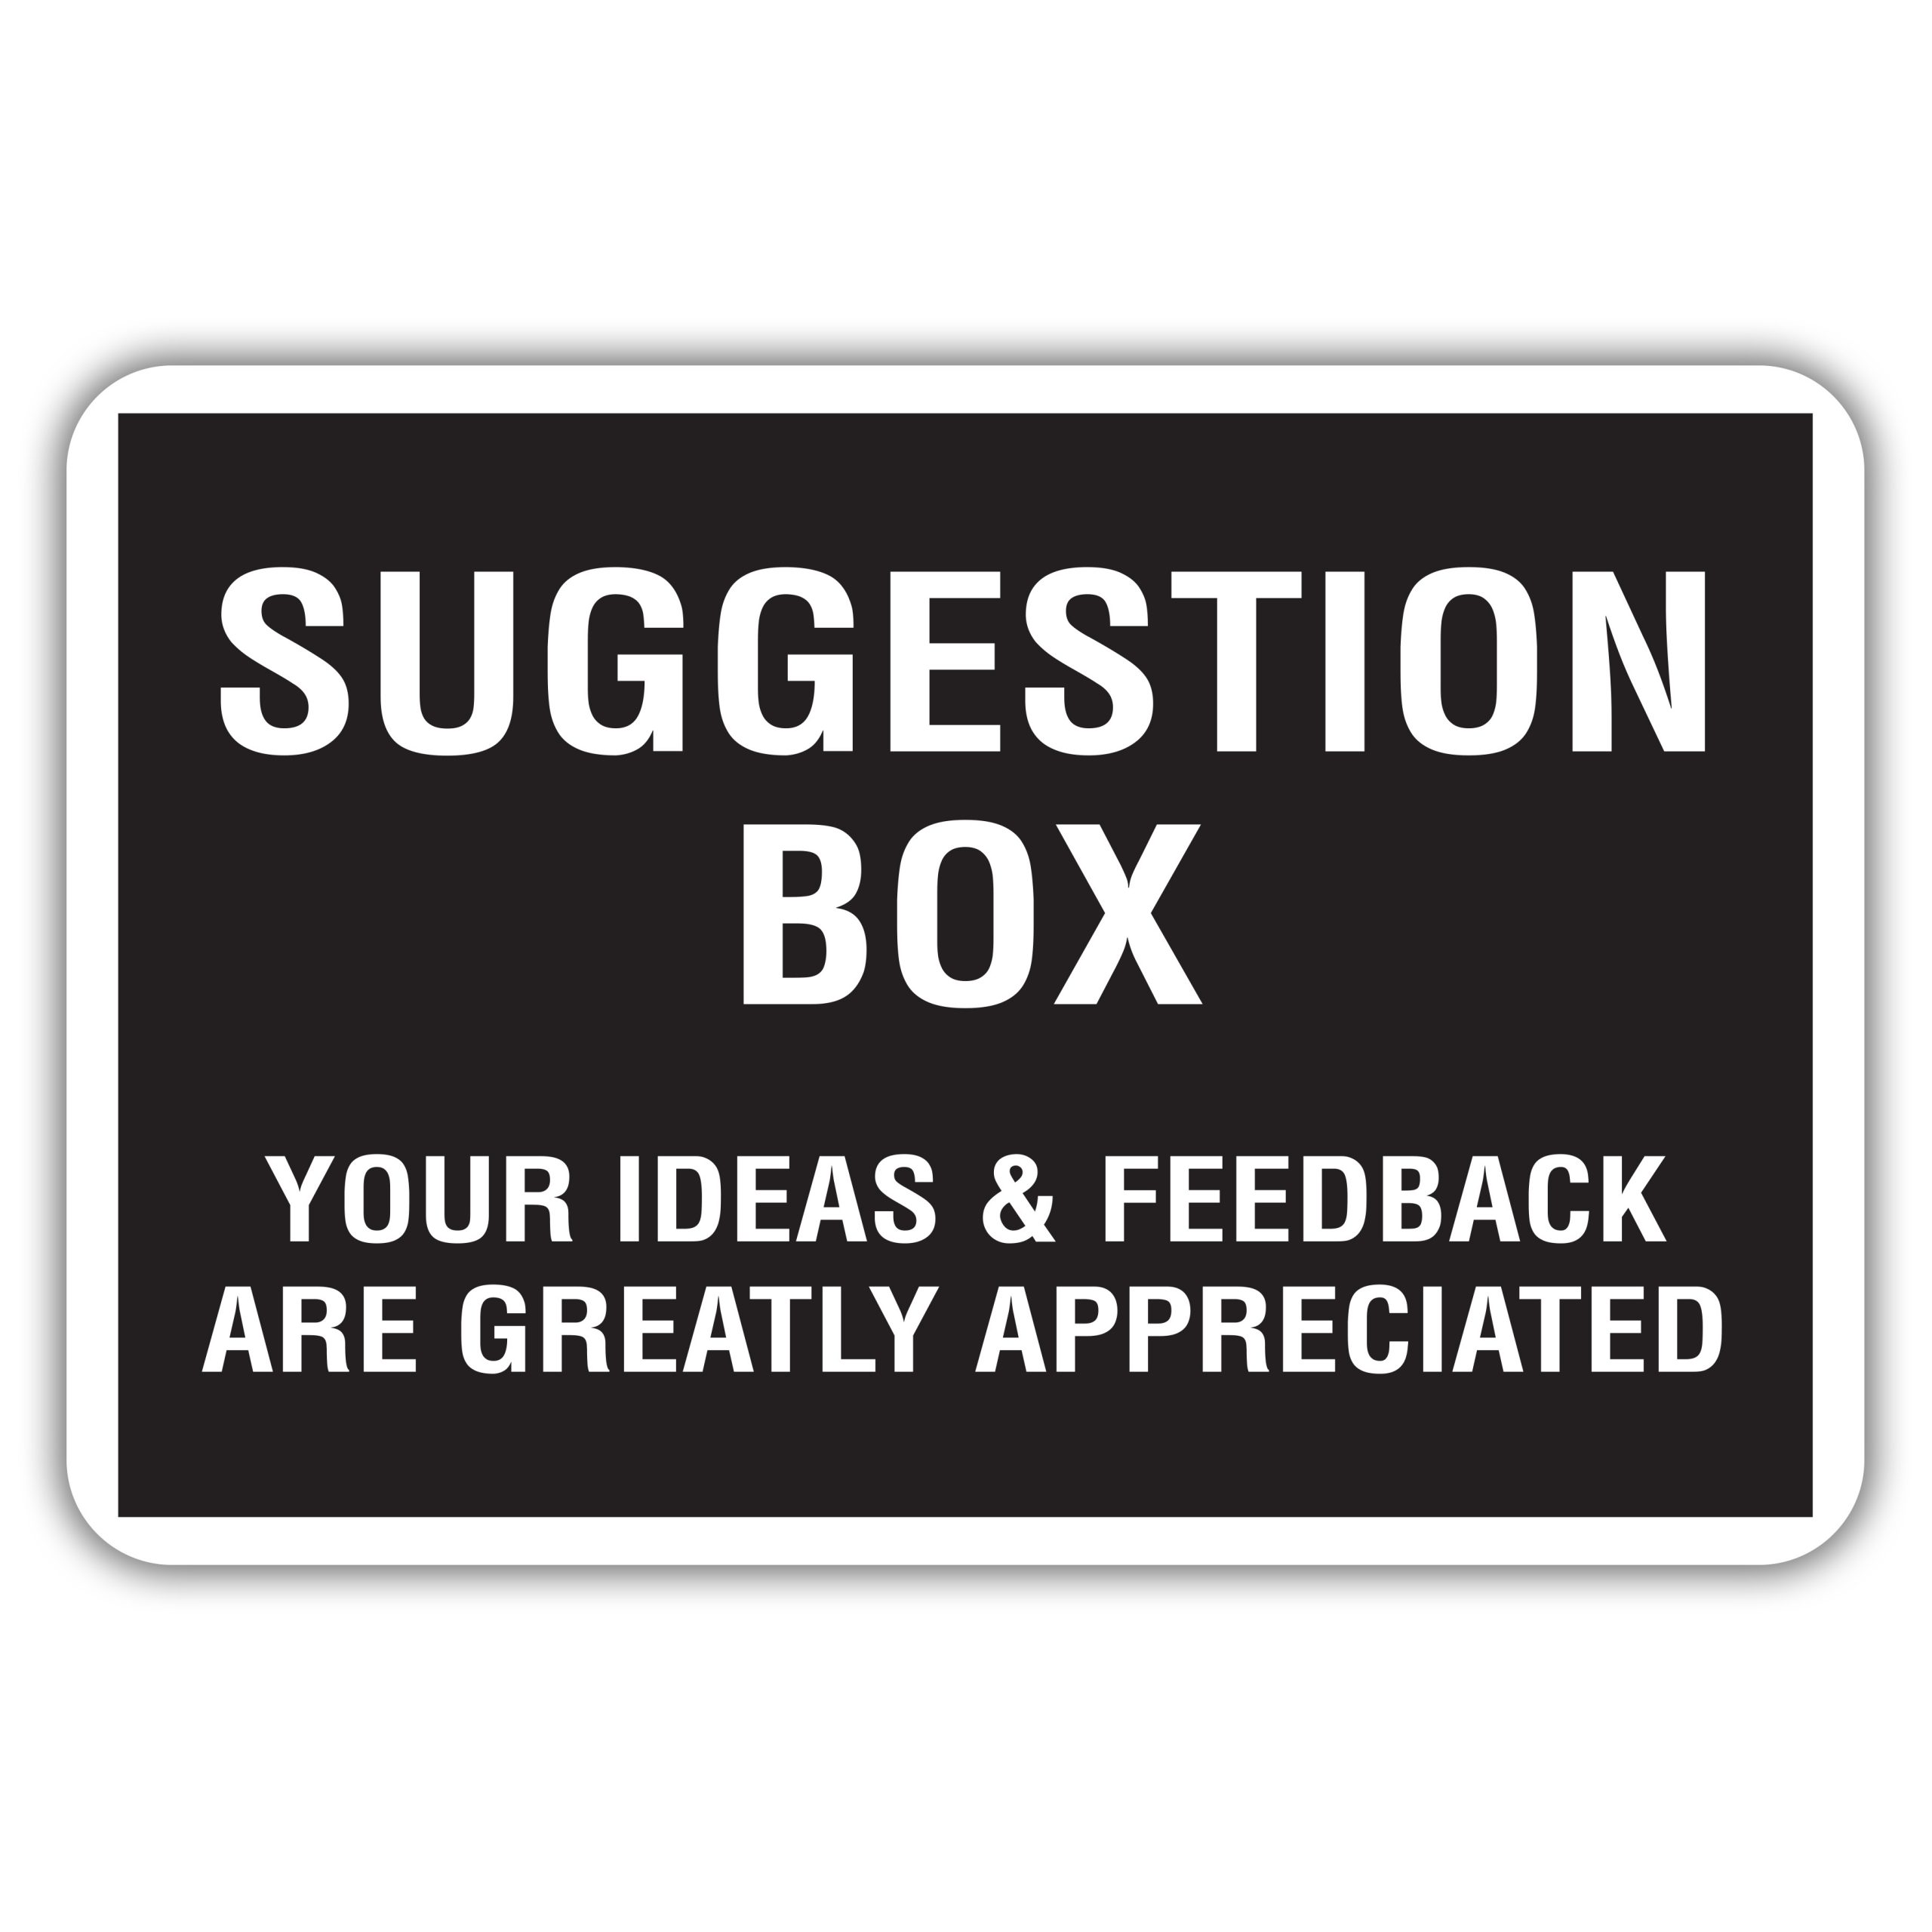 SUGGESTION BOX YOUR IDEAS American Sign Company